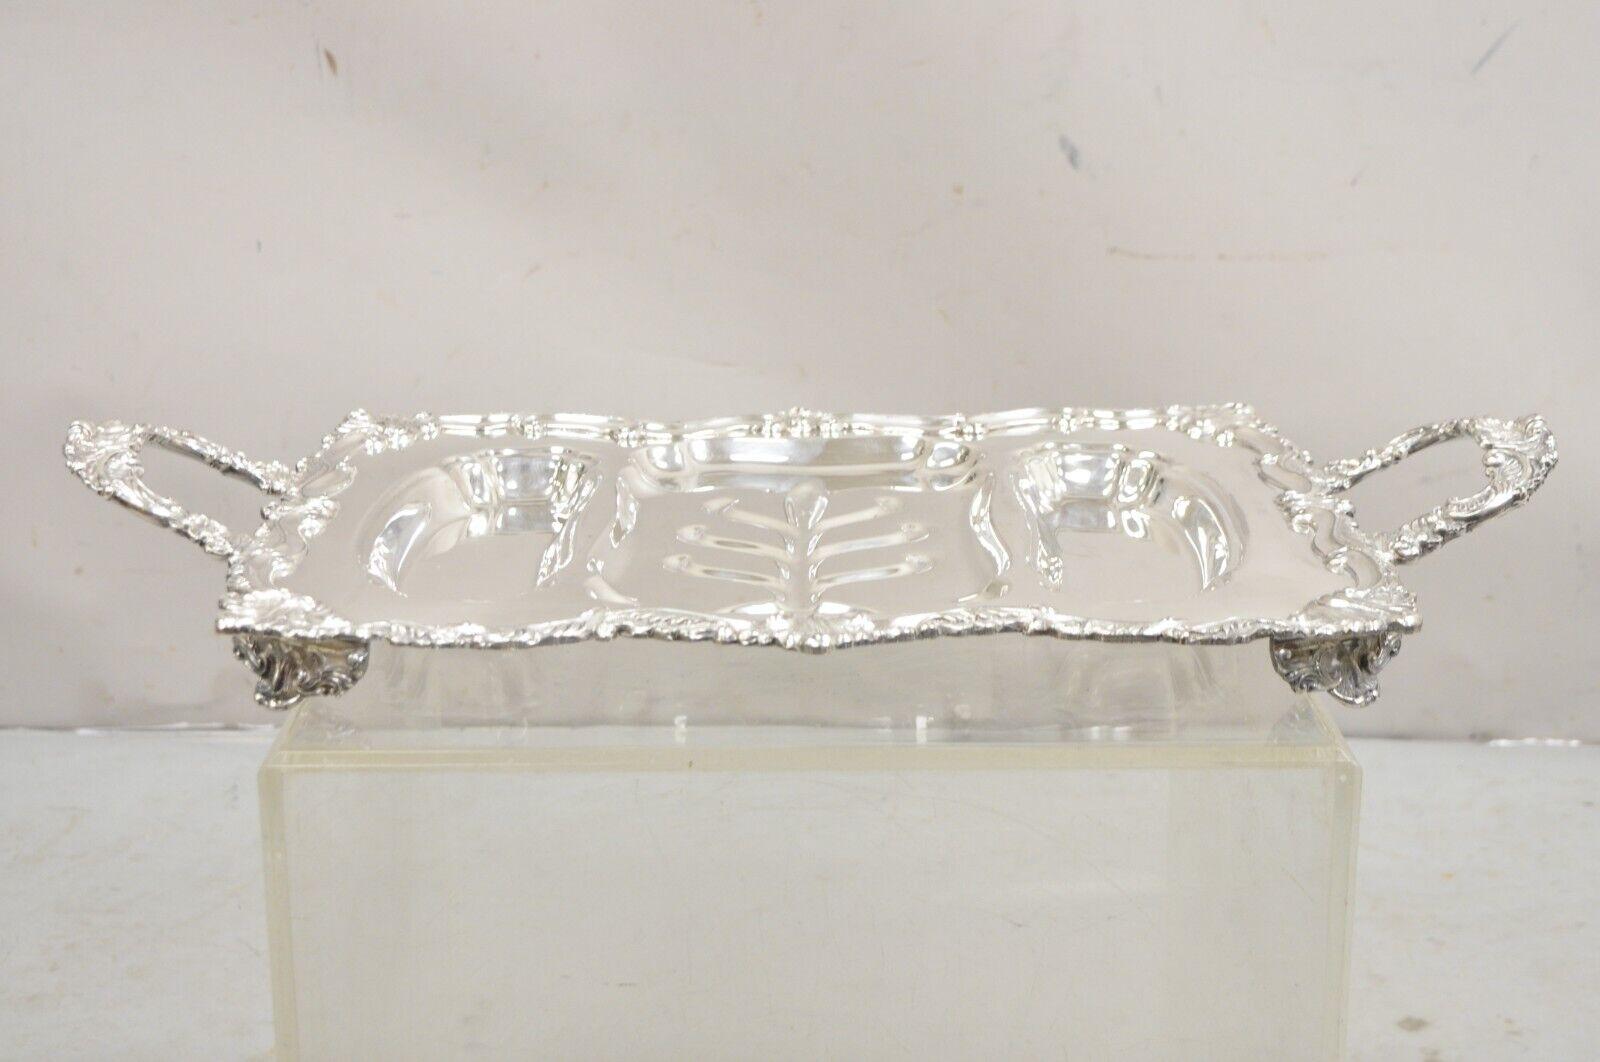 Vintage Victorian Style Ornate Silver Plated Twin Handle Meat Cutlery Serving Platter Tray. Circa Mid 20th Century. Measurements:  3